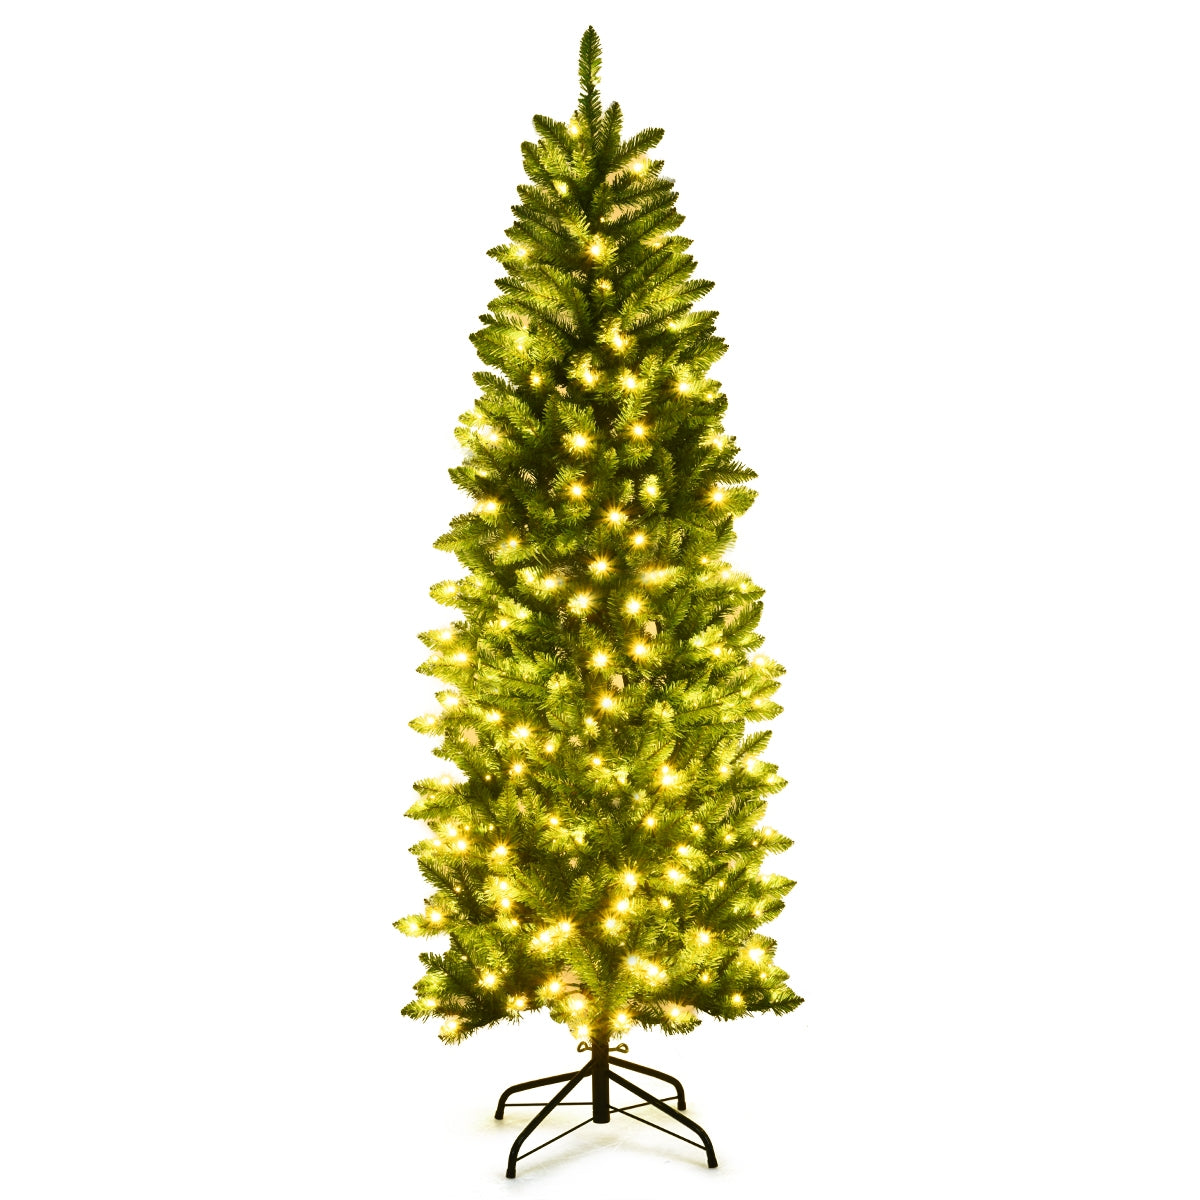 6 ft PVC Hinged Pre-lit Artificial Fir Pencil Christmas Tree with 150 Warm White UL-listed Lights